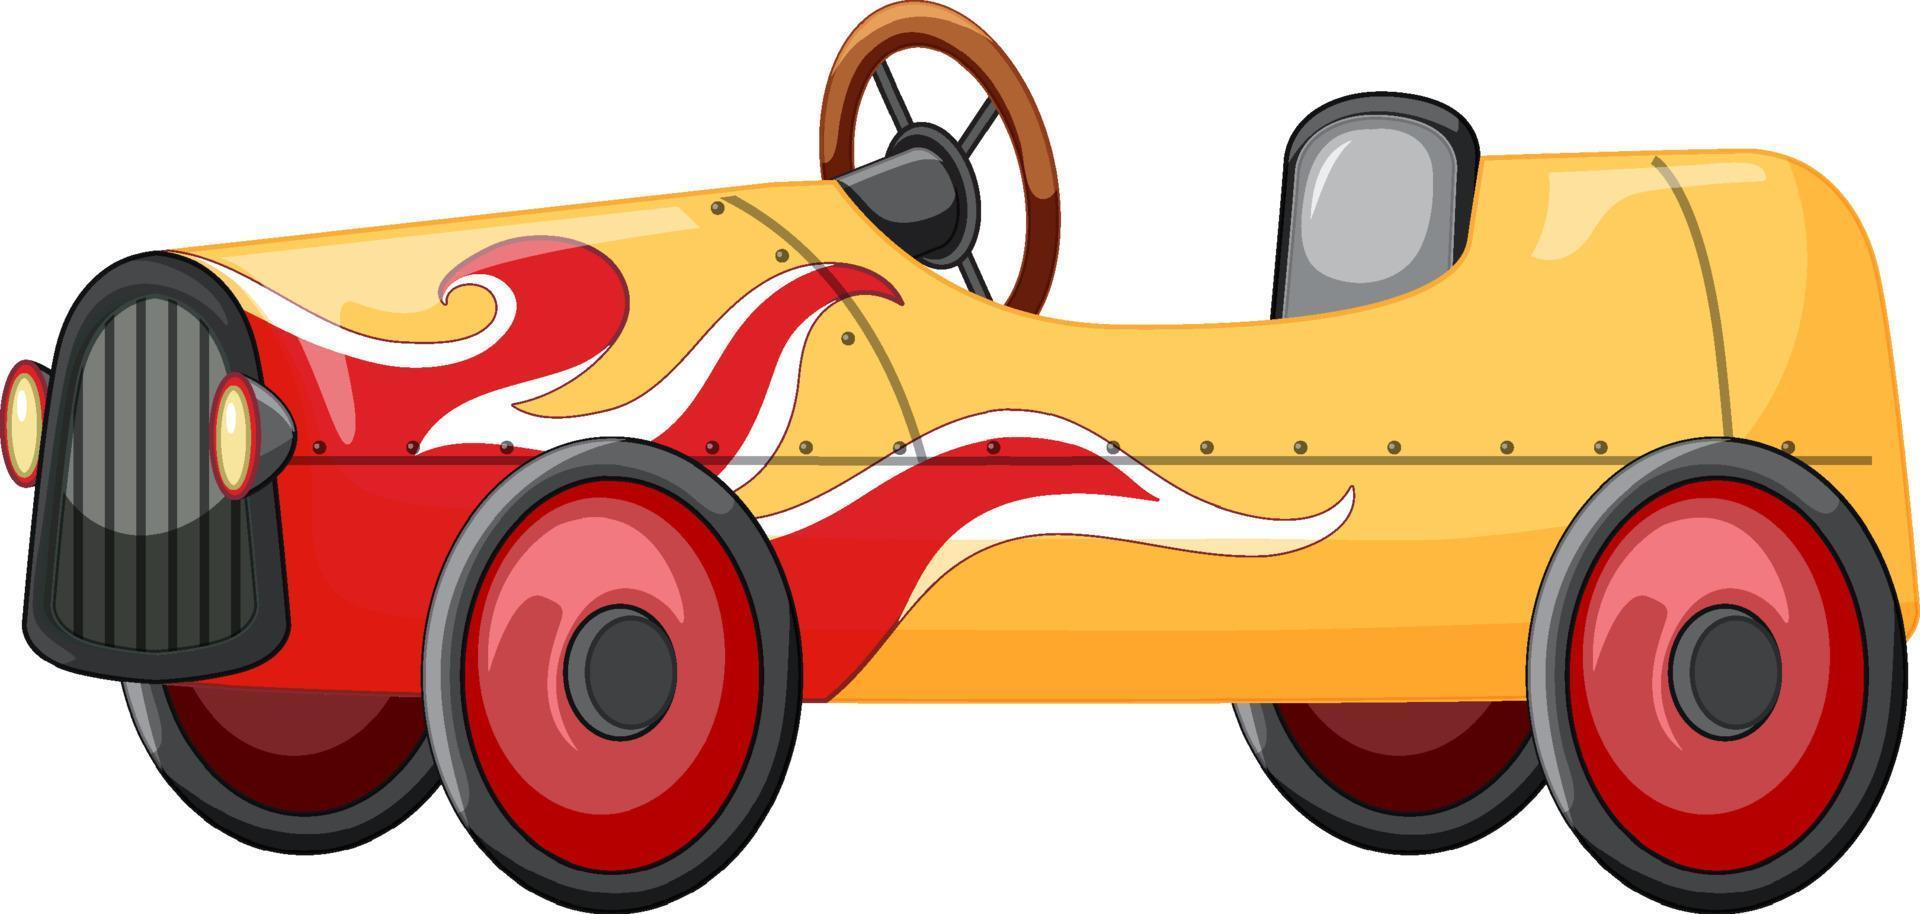 Vintage mini car toy on white background vector